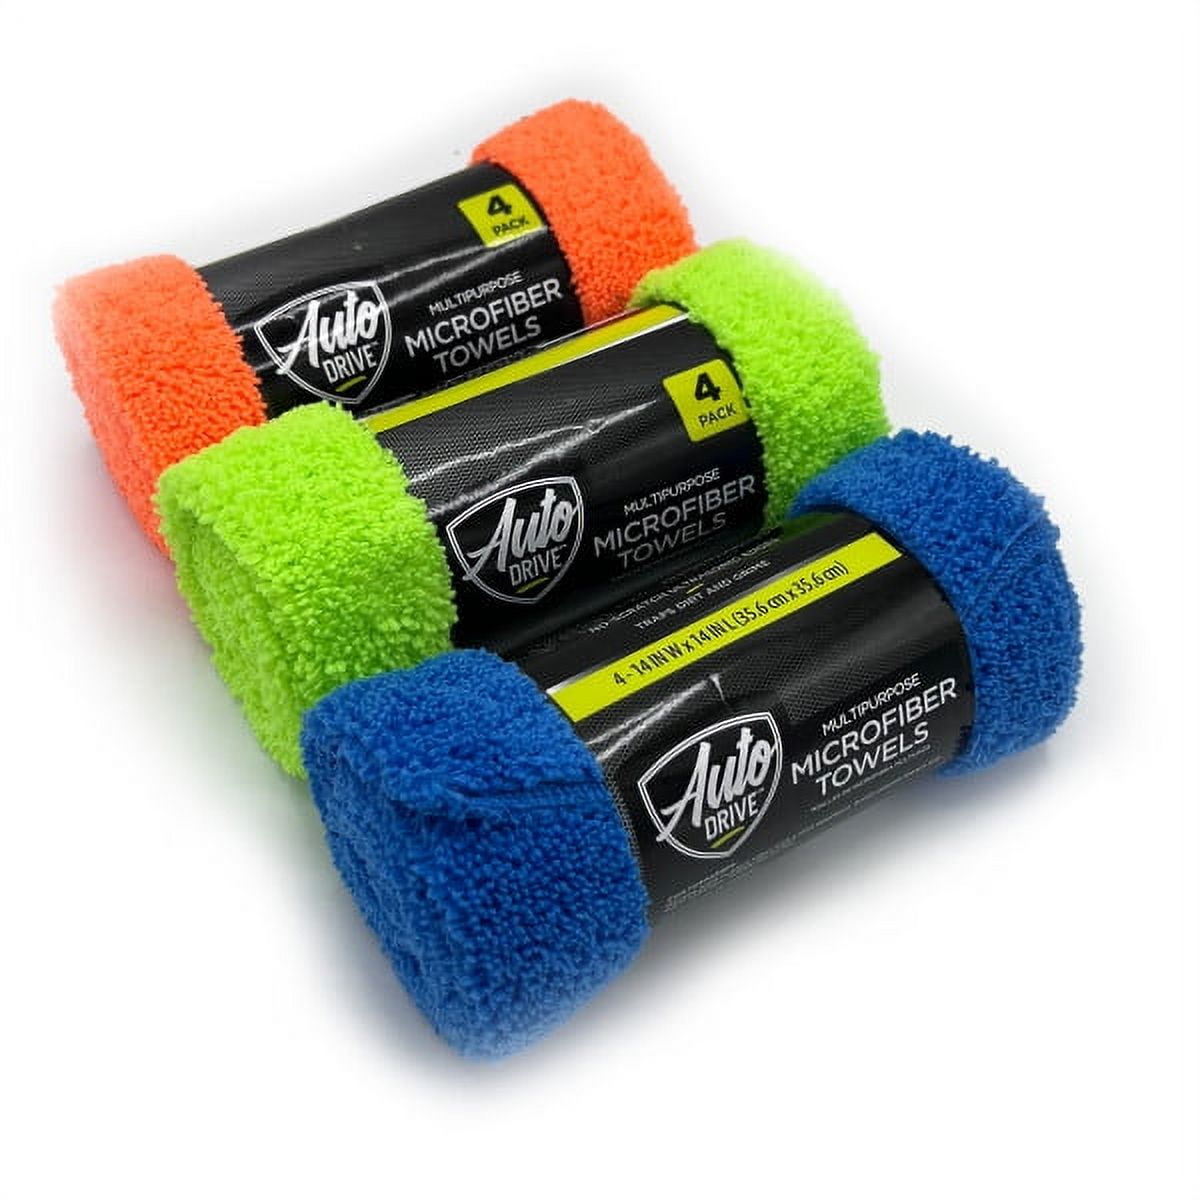 DNA MOTORING TOOLS-00257 Cleaning Towels Car Washing Microfiber Cloth for  Auto Detailing Home Kitchen, 12x16 Inch, Yellow, Orange, Blue, Green, Pack